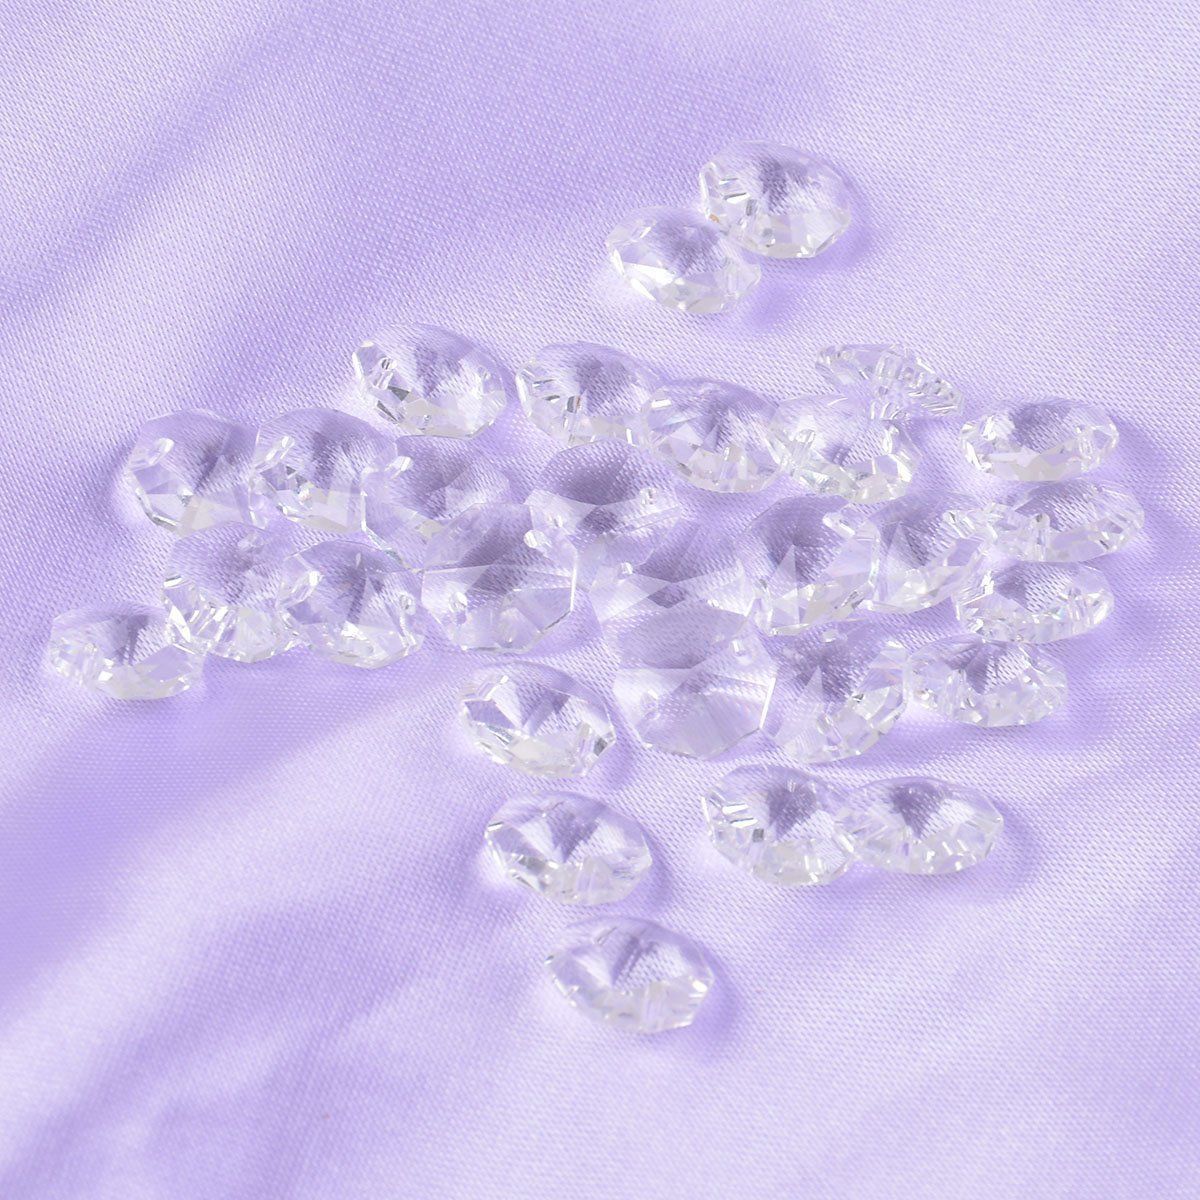 300Pcs Crystal 14mm Octagon Beads Chandelier Lamp Parts Prism Ornament Free Ring - $14.55